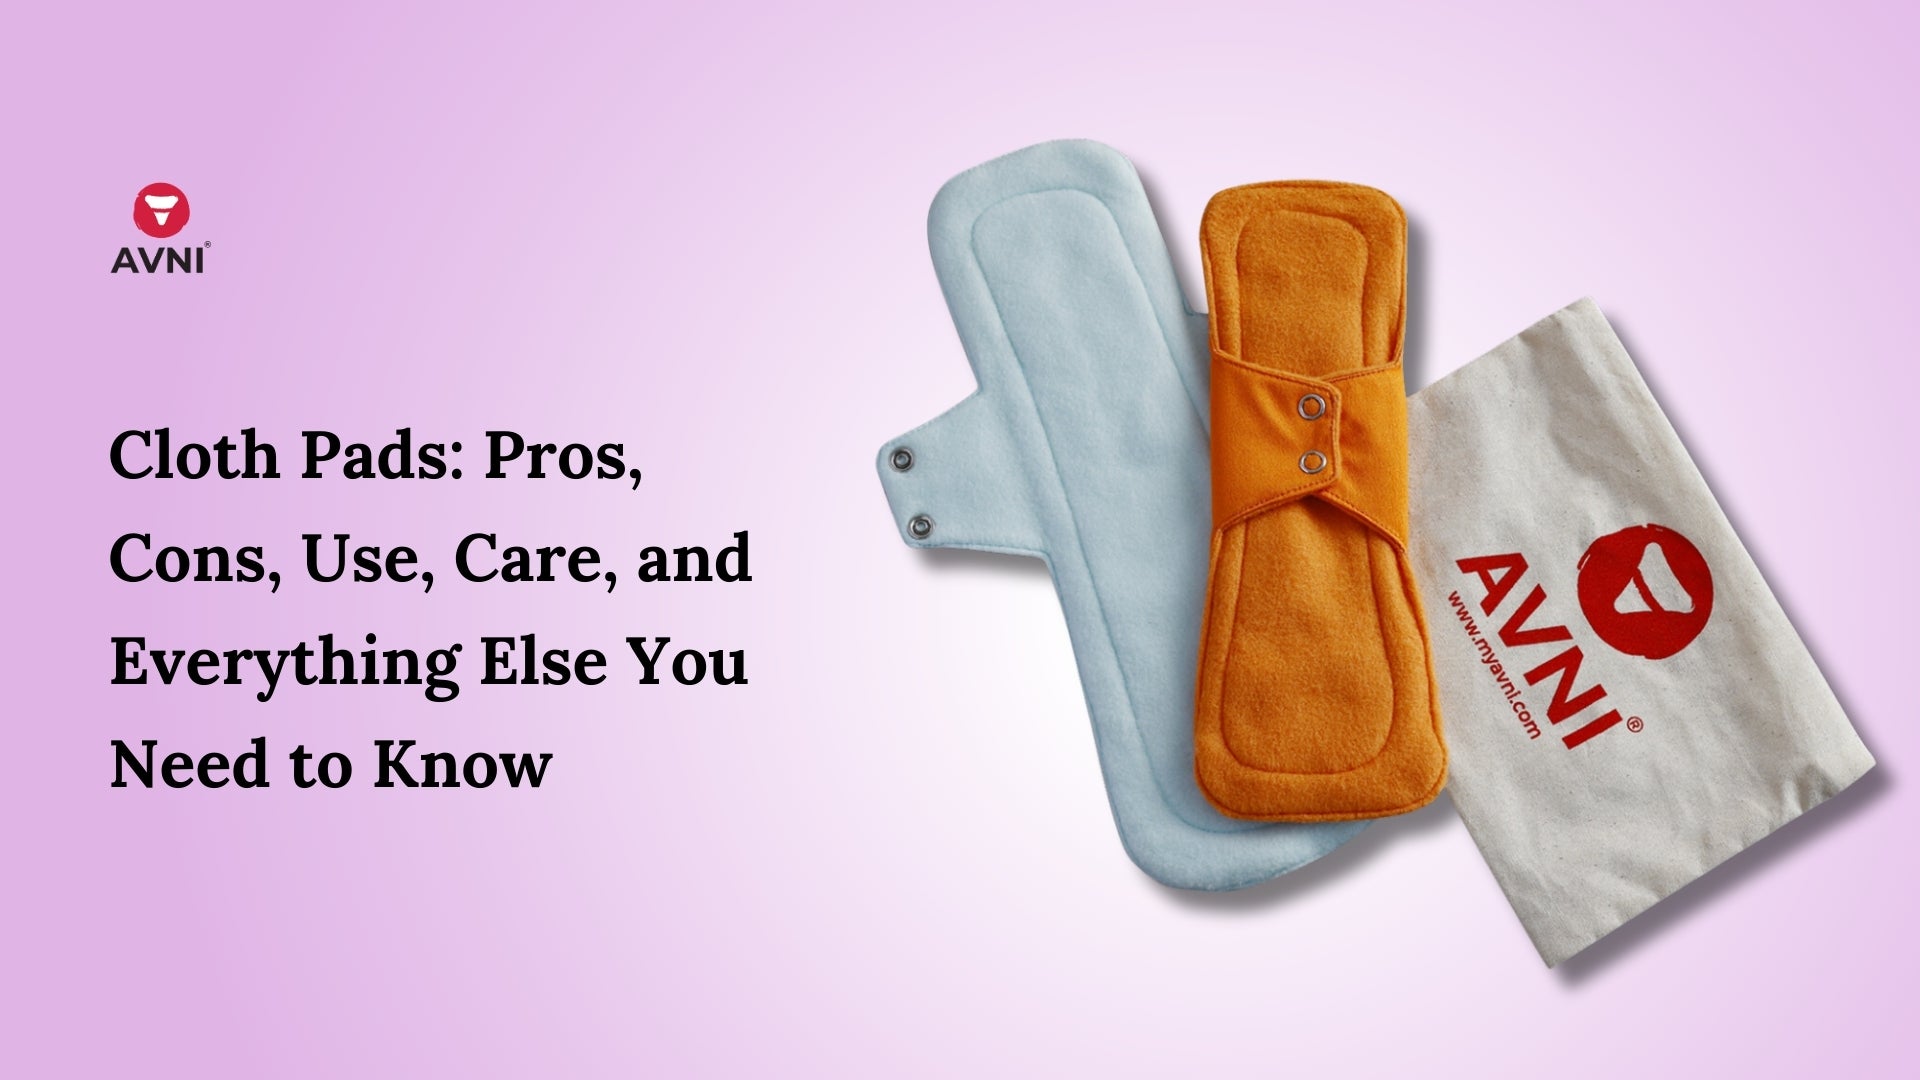 Cloth Pads: Pros, Cons, Use, Care, and Everything Else You Need to Kno